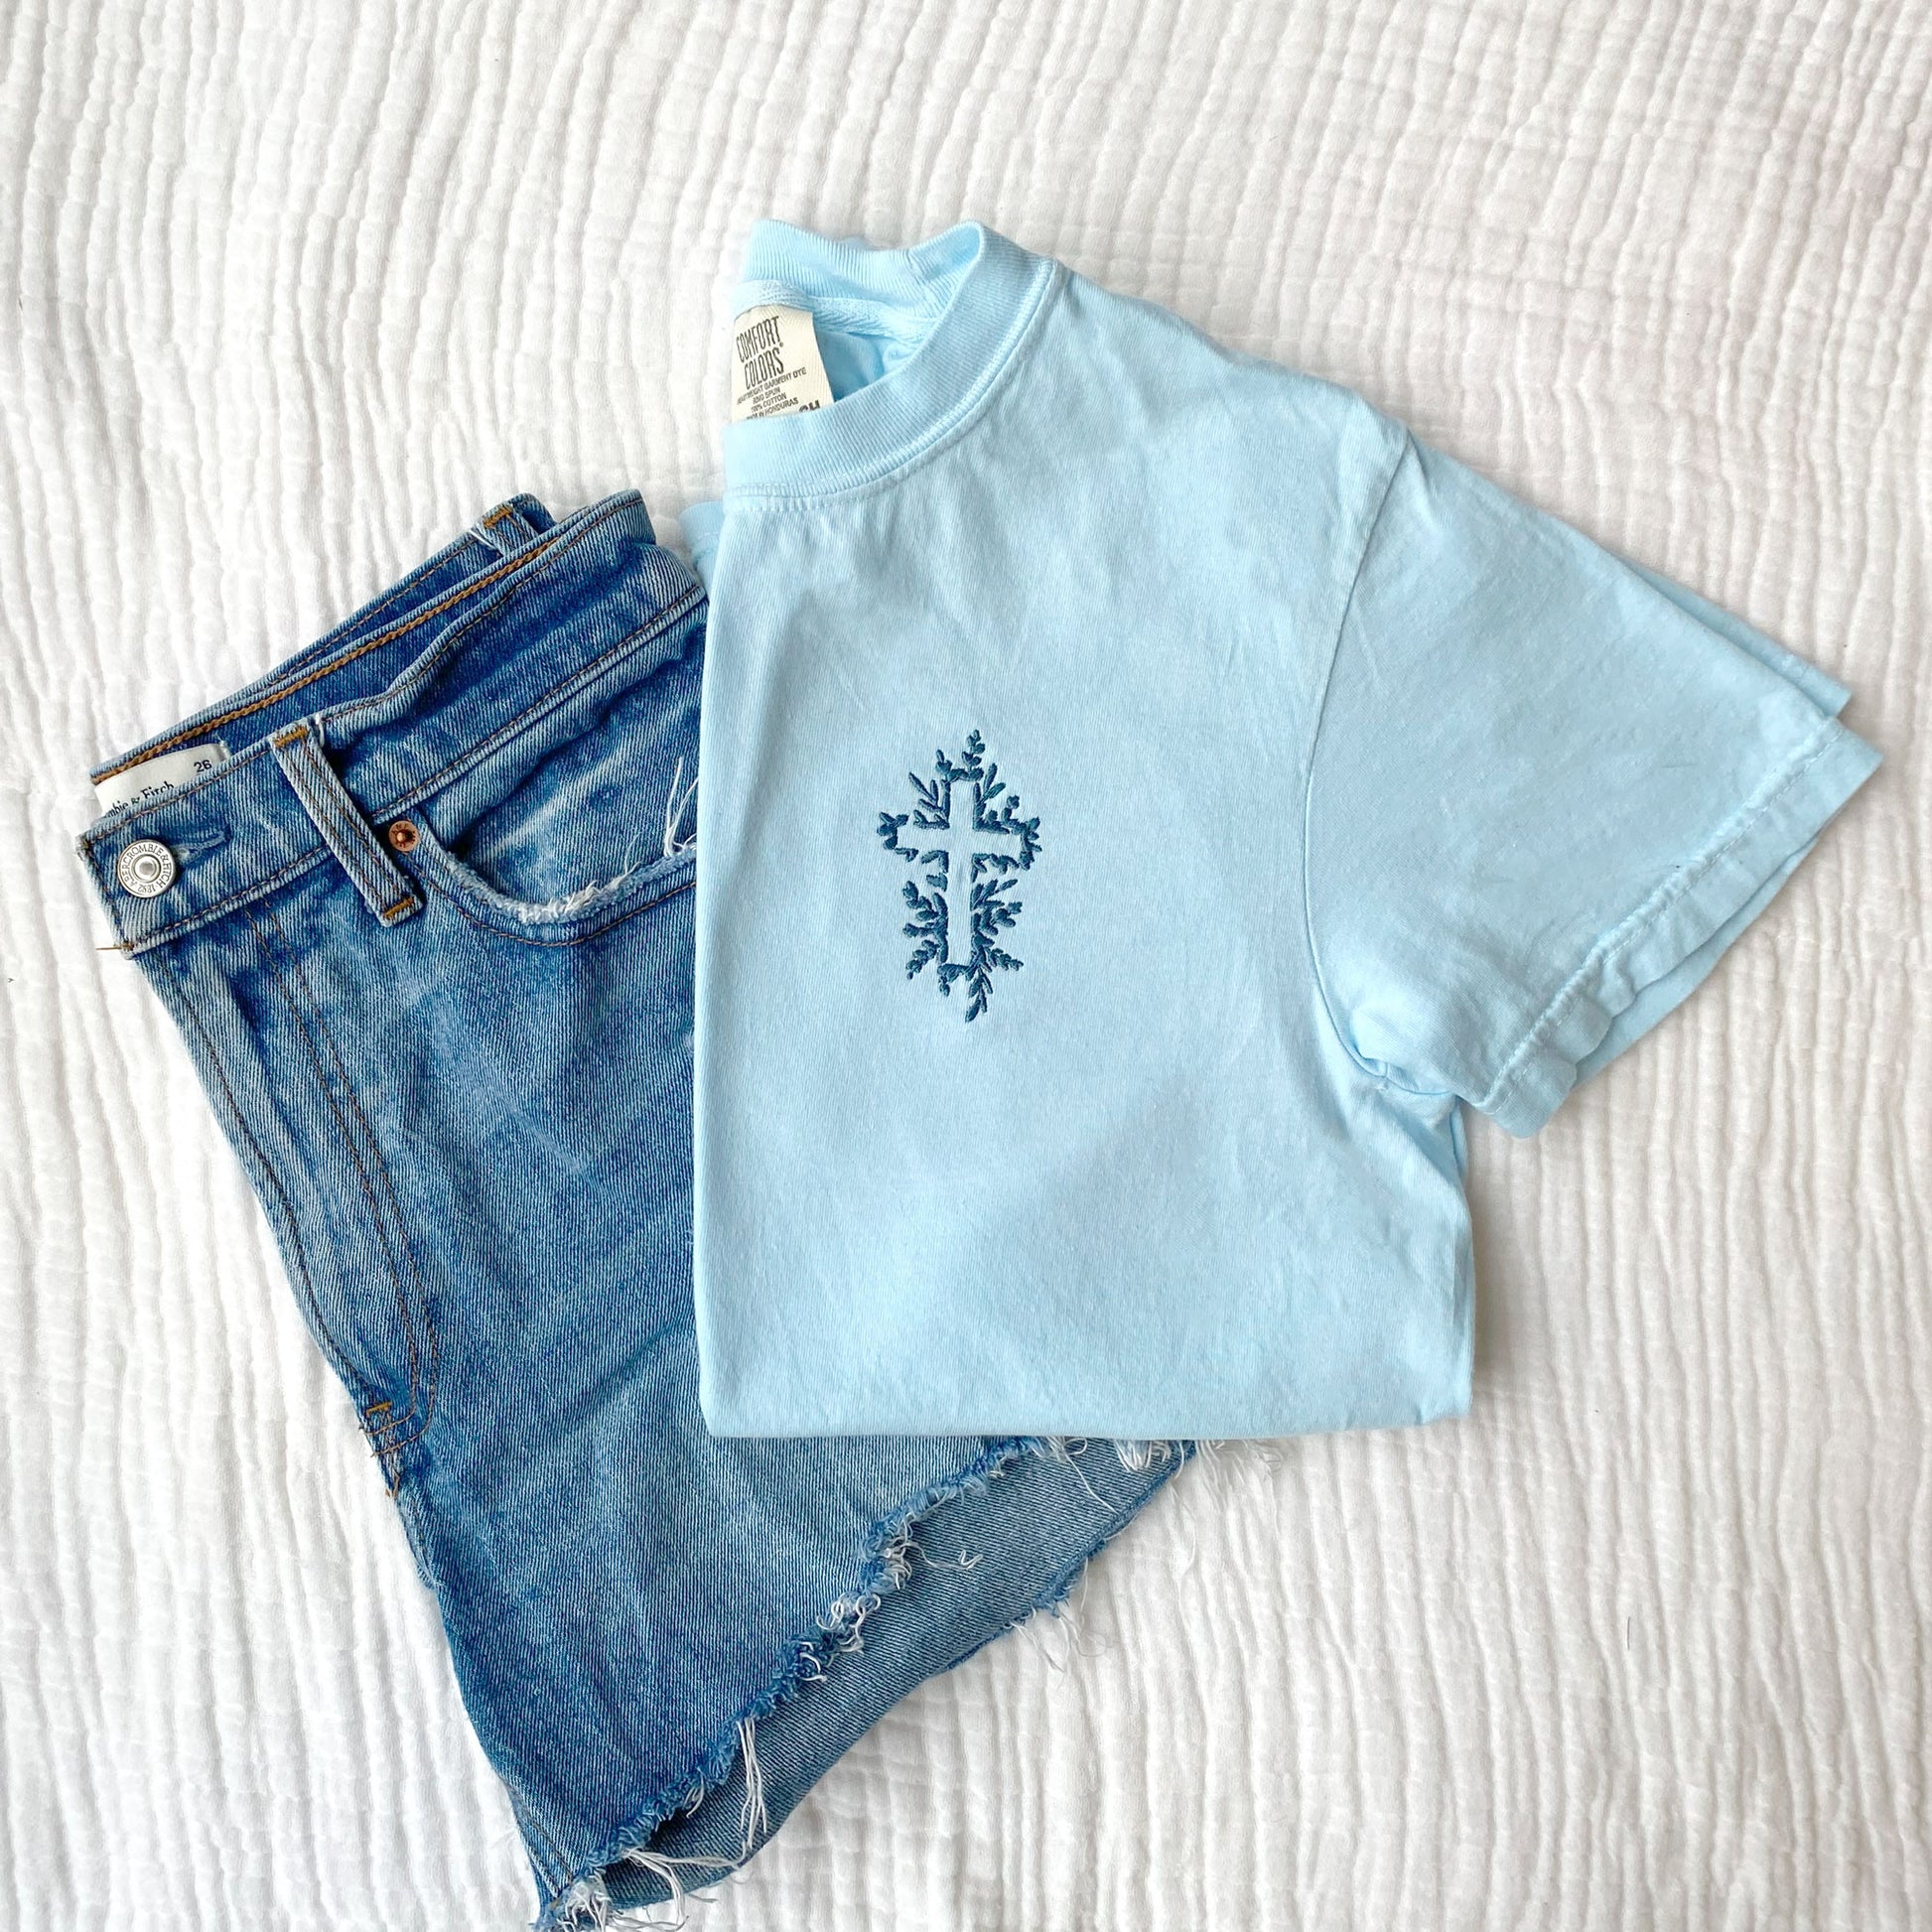 chambray comfort colors t-shirt with a floral embroidered cross in french blue thread and a pair of jean shorts